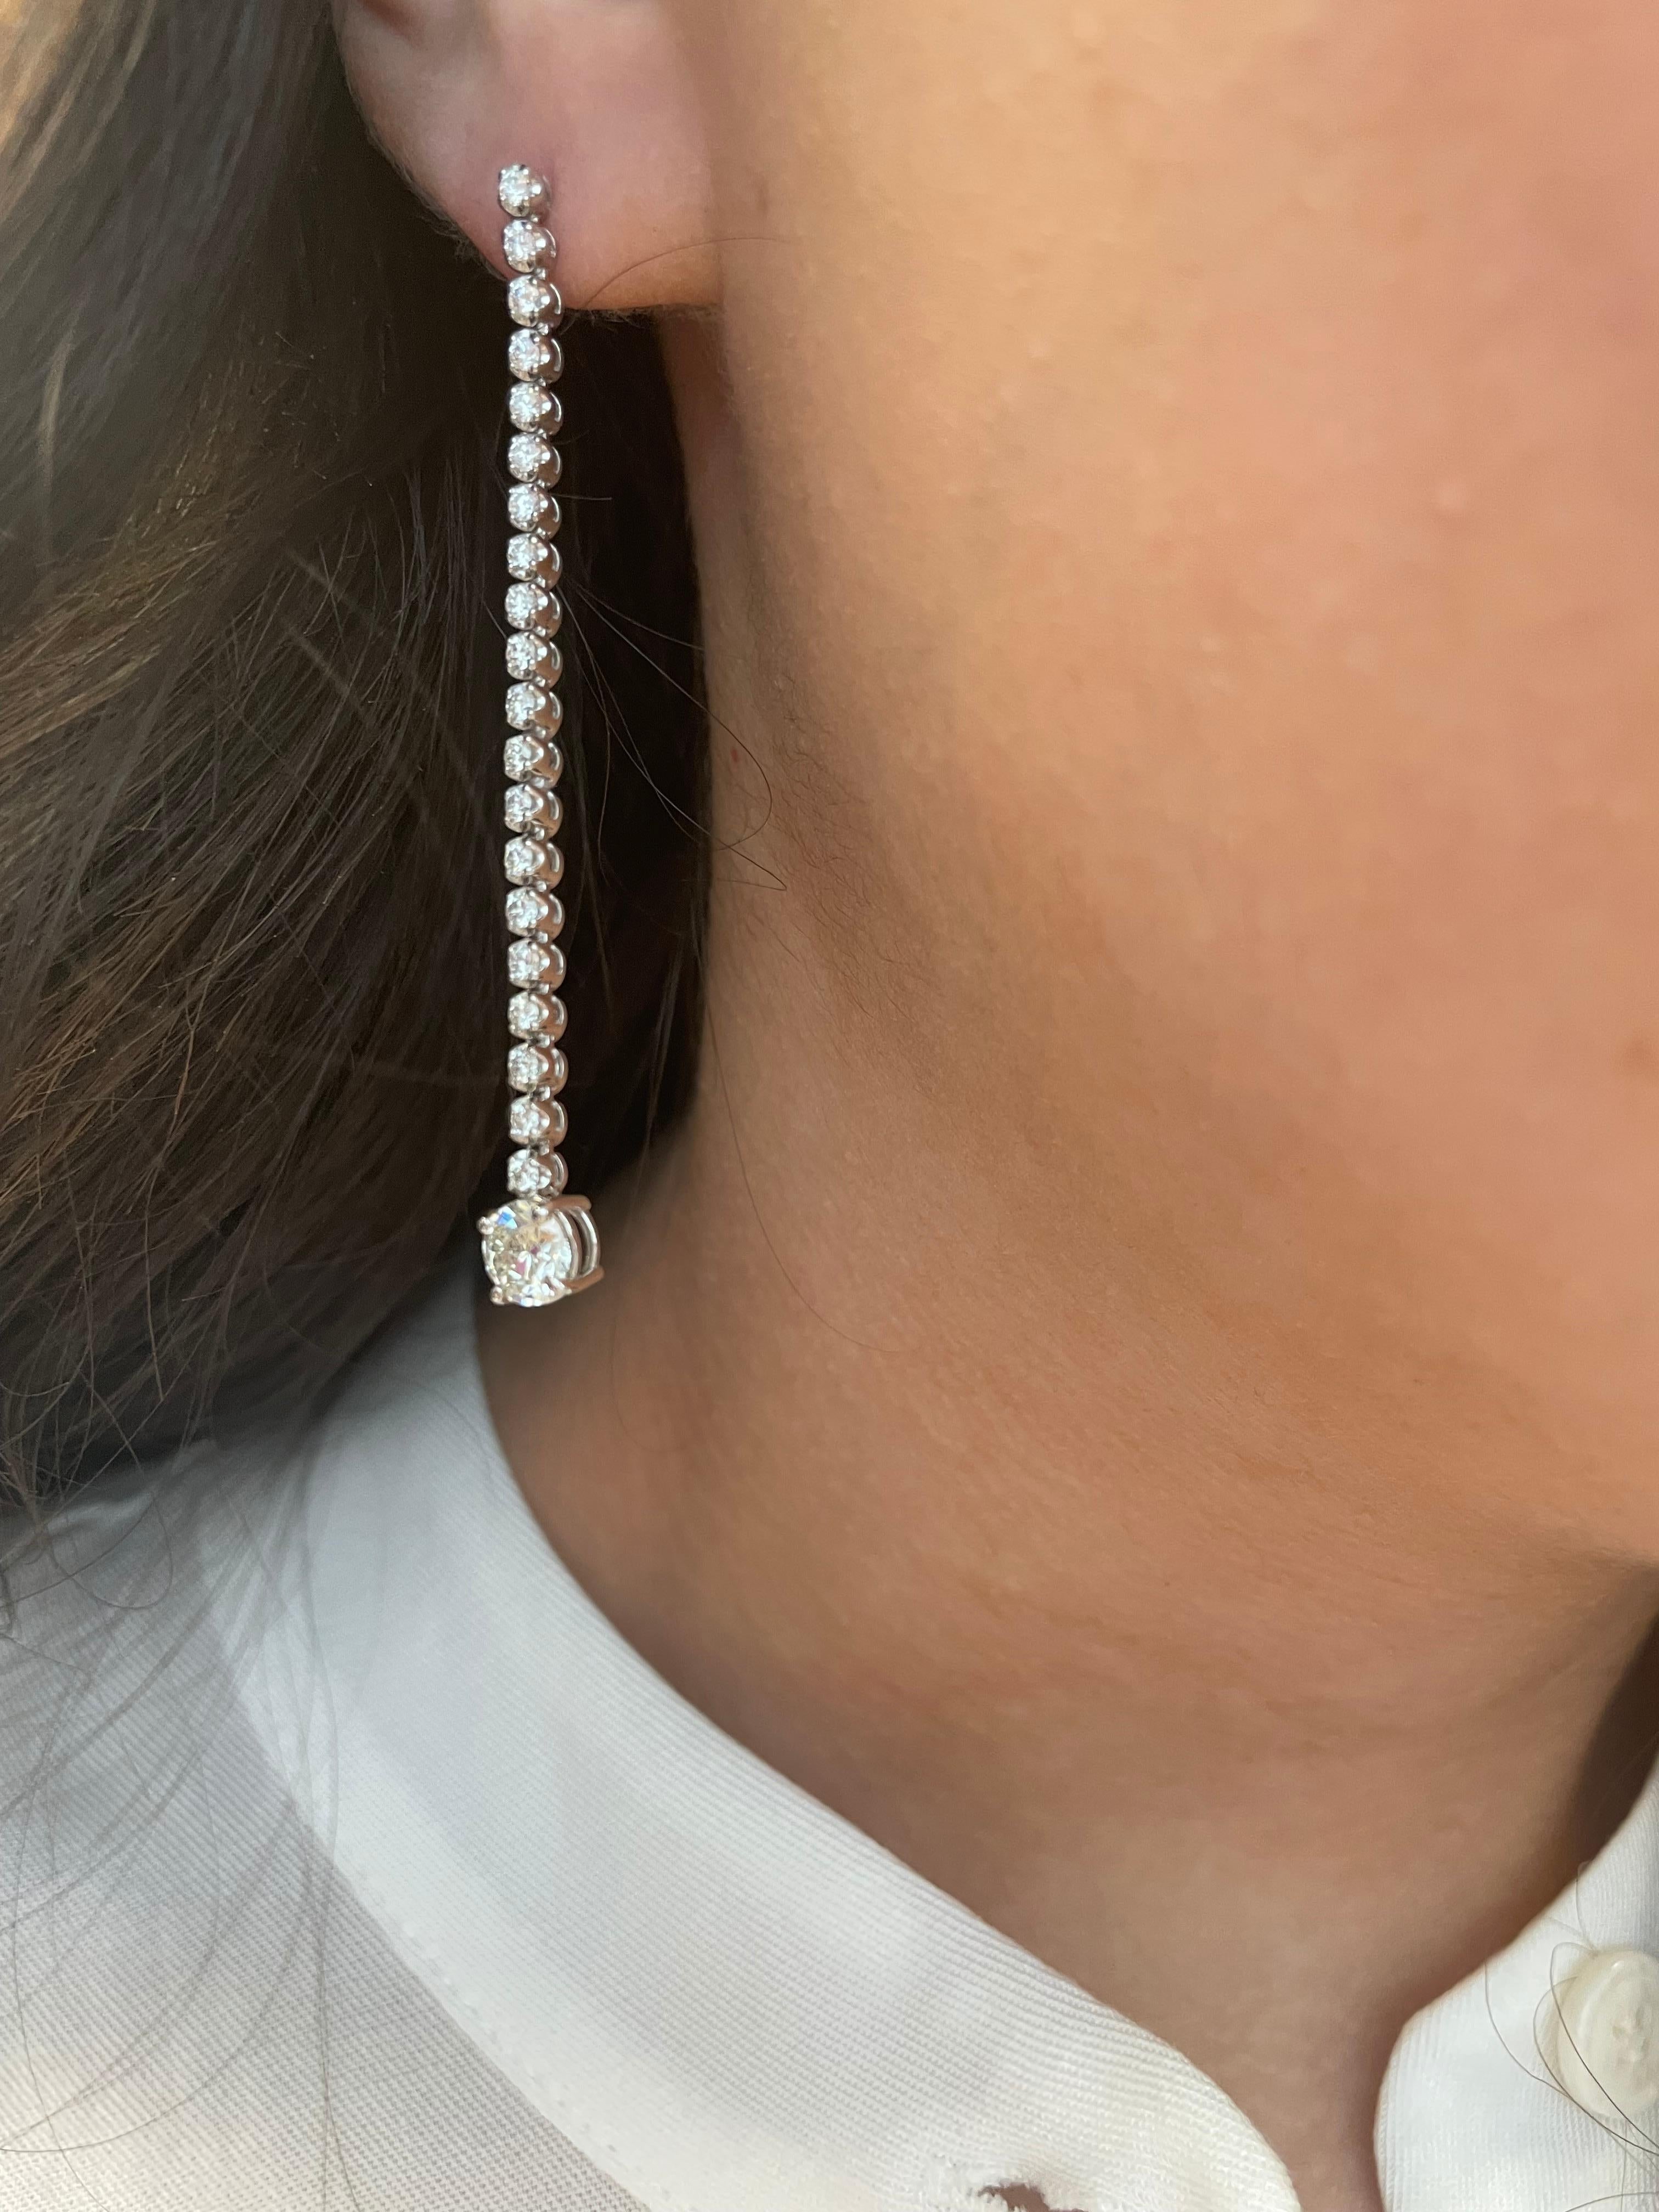 Stunning dangling diamond earring, each center stone EGL certified. By Alexander Beverly Hills.
Two matching center round brilliant diamonds 1.40 carats total. One stone H color grade and the other I color grade. One stone SI1 clarity grade and the